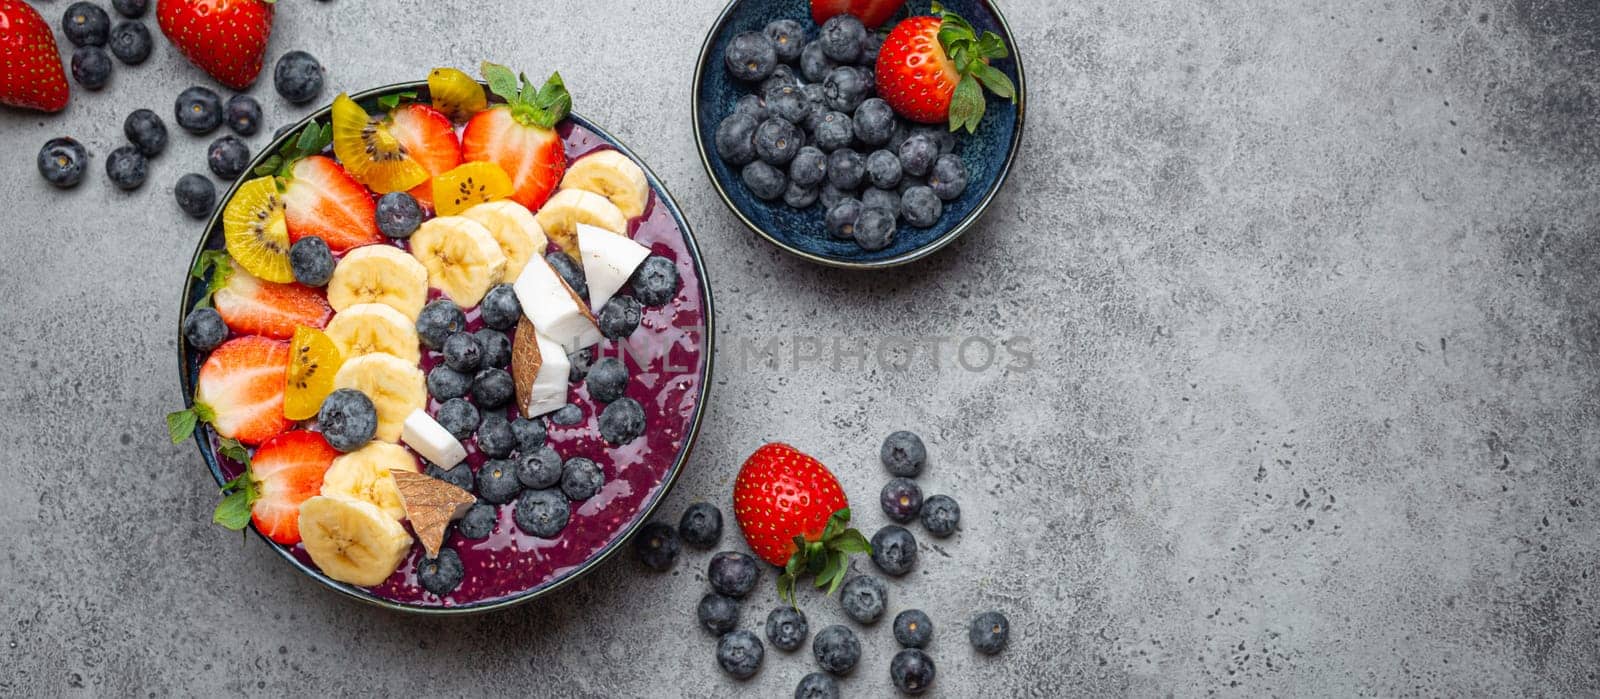 Healthy summer acai smoothie bowl with chia seeds, fresh banana, strawberry, blueberry, cocos, kiwi top view, rustic concrete background with spoon. Copy space by its_al_dente